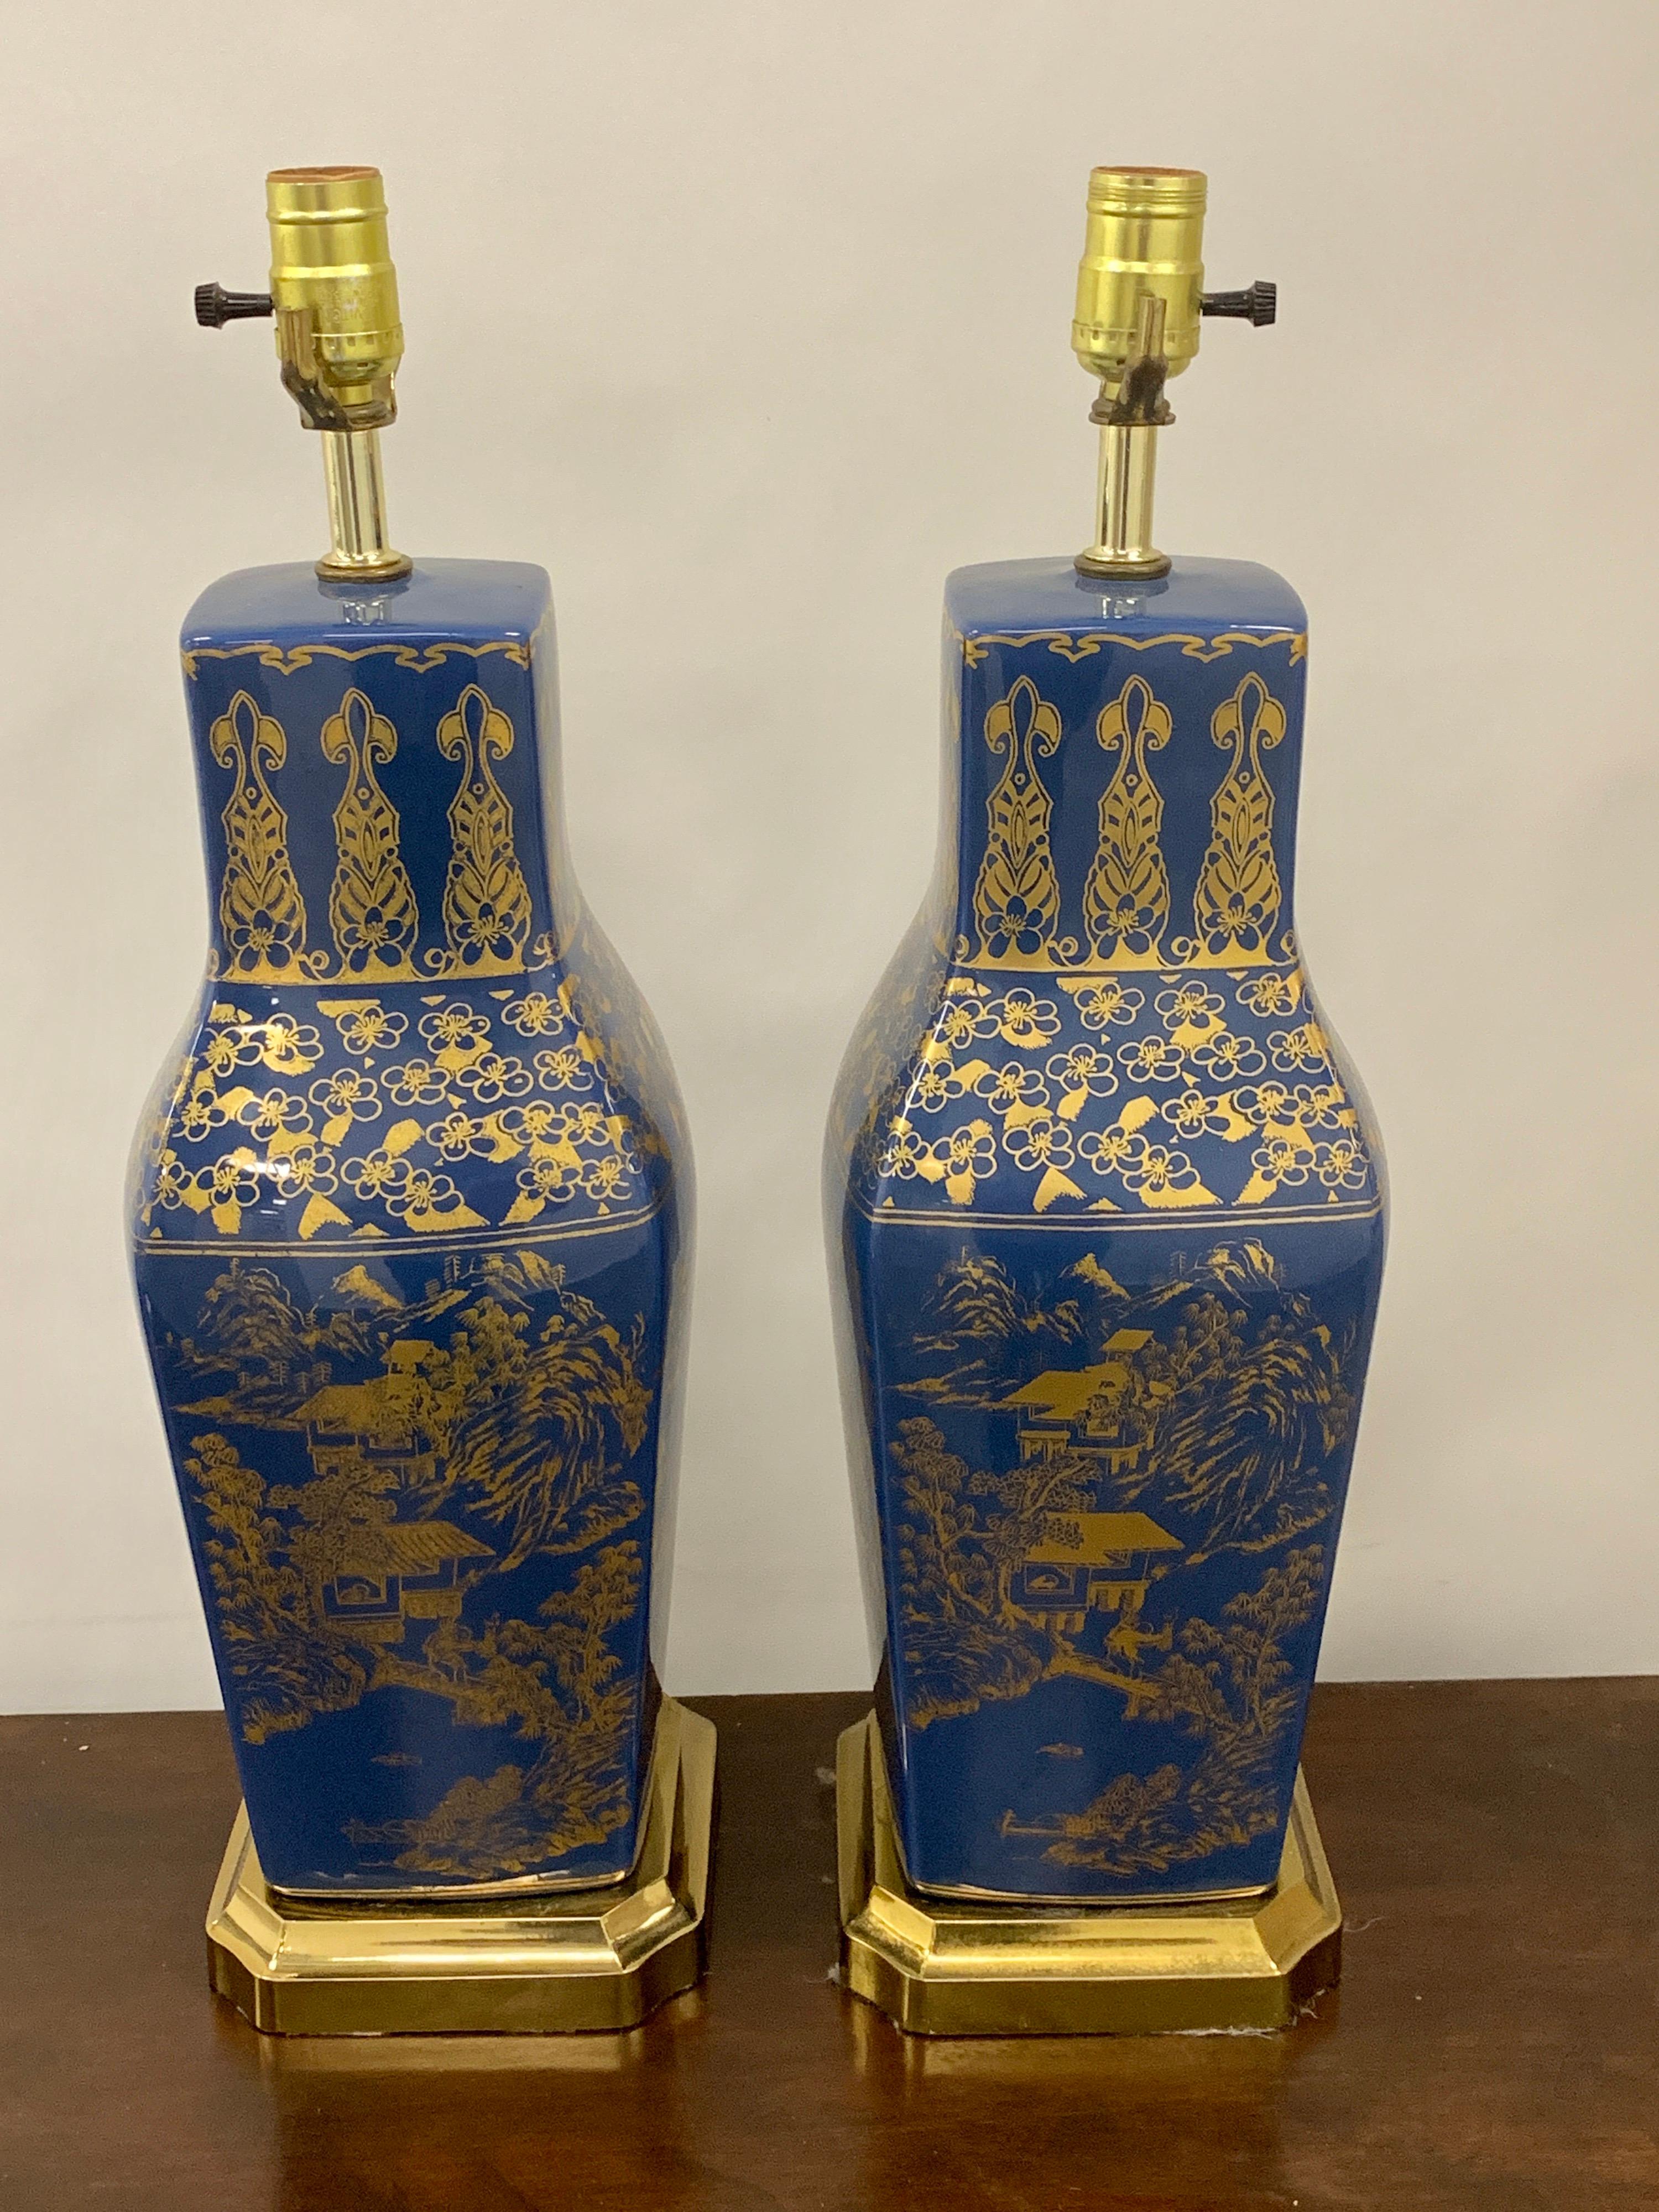 Pair of powder blue Chinese export porcelain with gilt decoration, each one raised on stepped brass base, with fine gilt chinoiserie decoration. New wiring.
Each lamp is raised on a 6.5